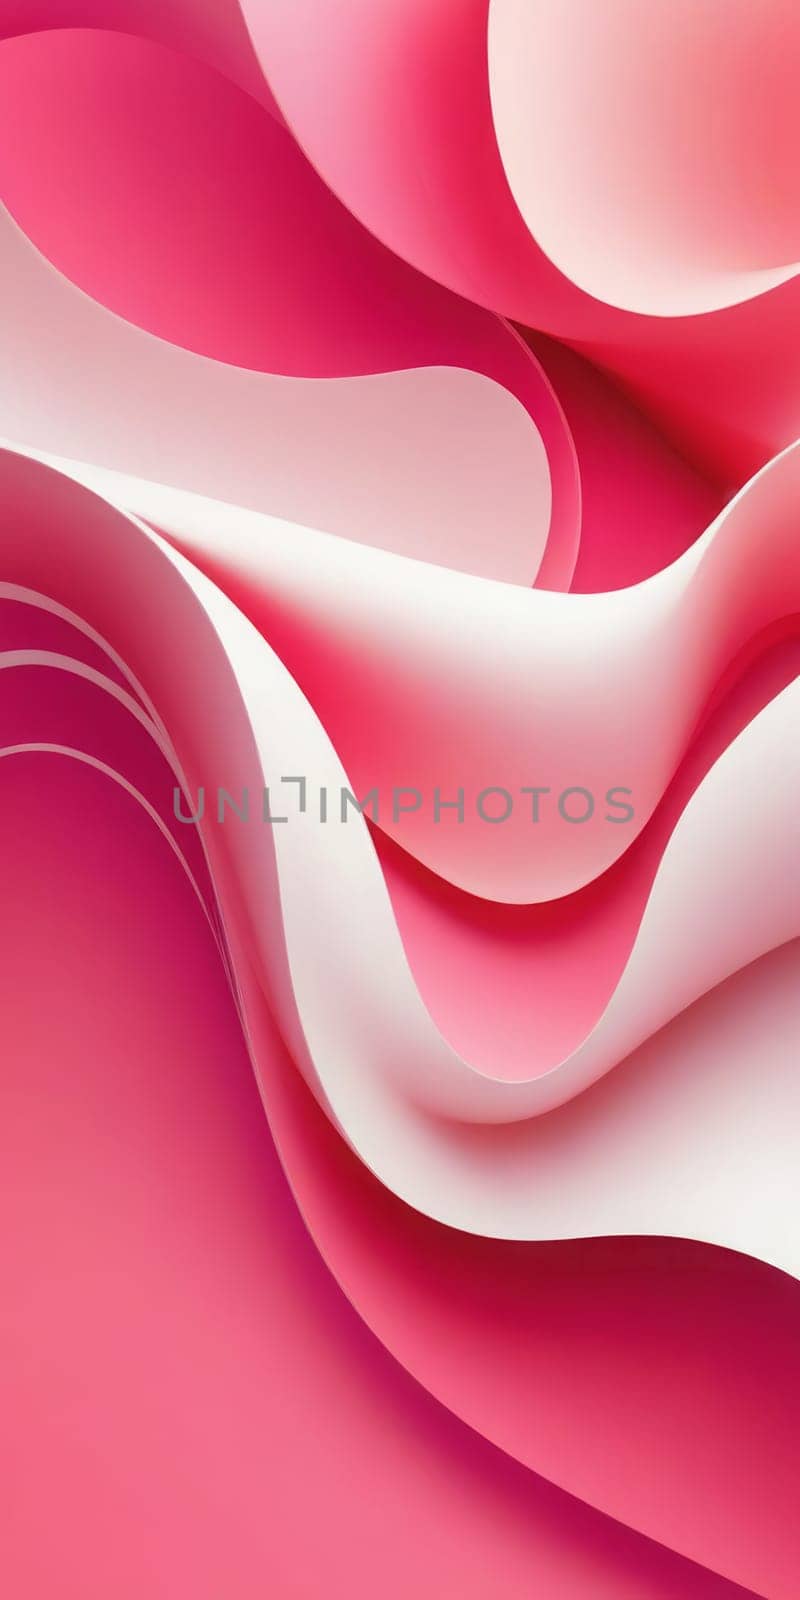 Organic Shapes in White and Pink by nkotlyar